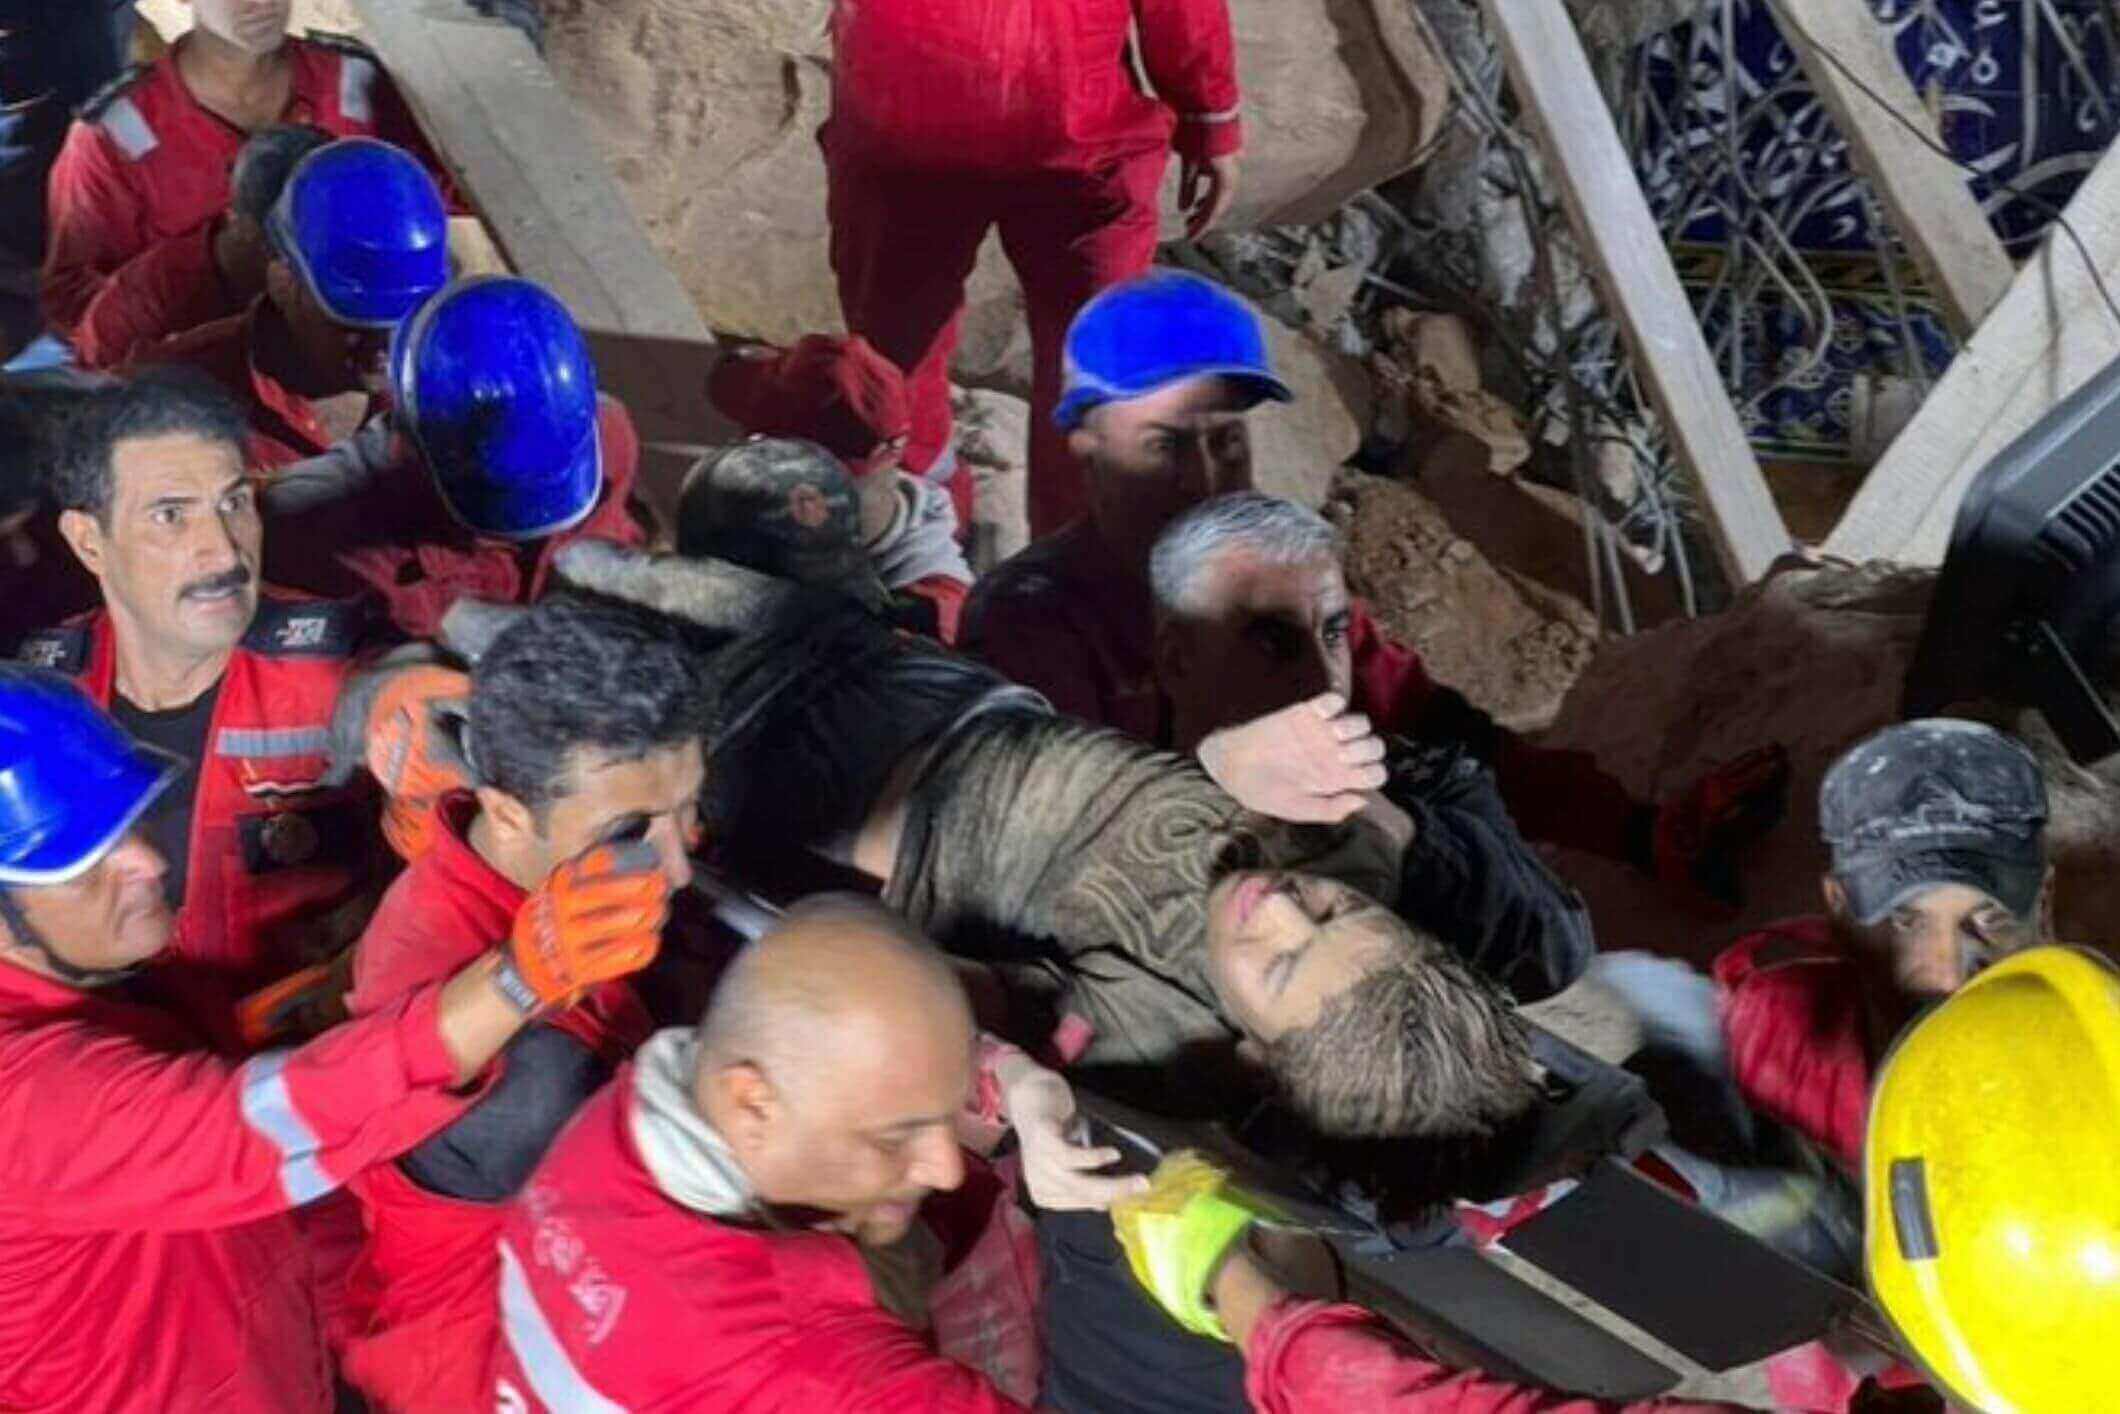 Seven Muslim Bodies Pulled From Rubble After Landslide Iraq Shrine Collapse